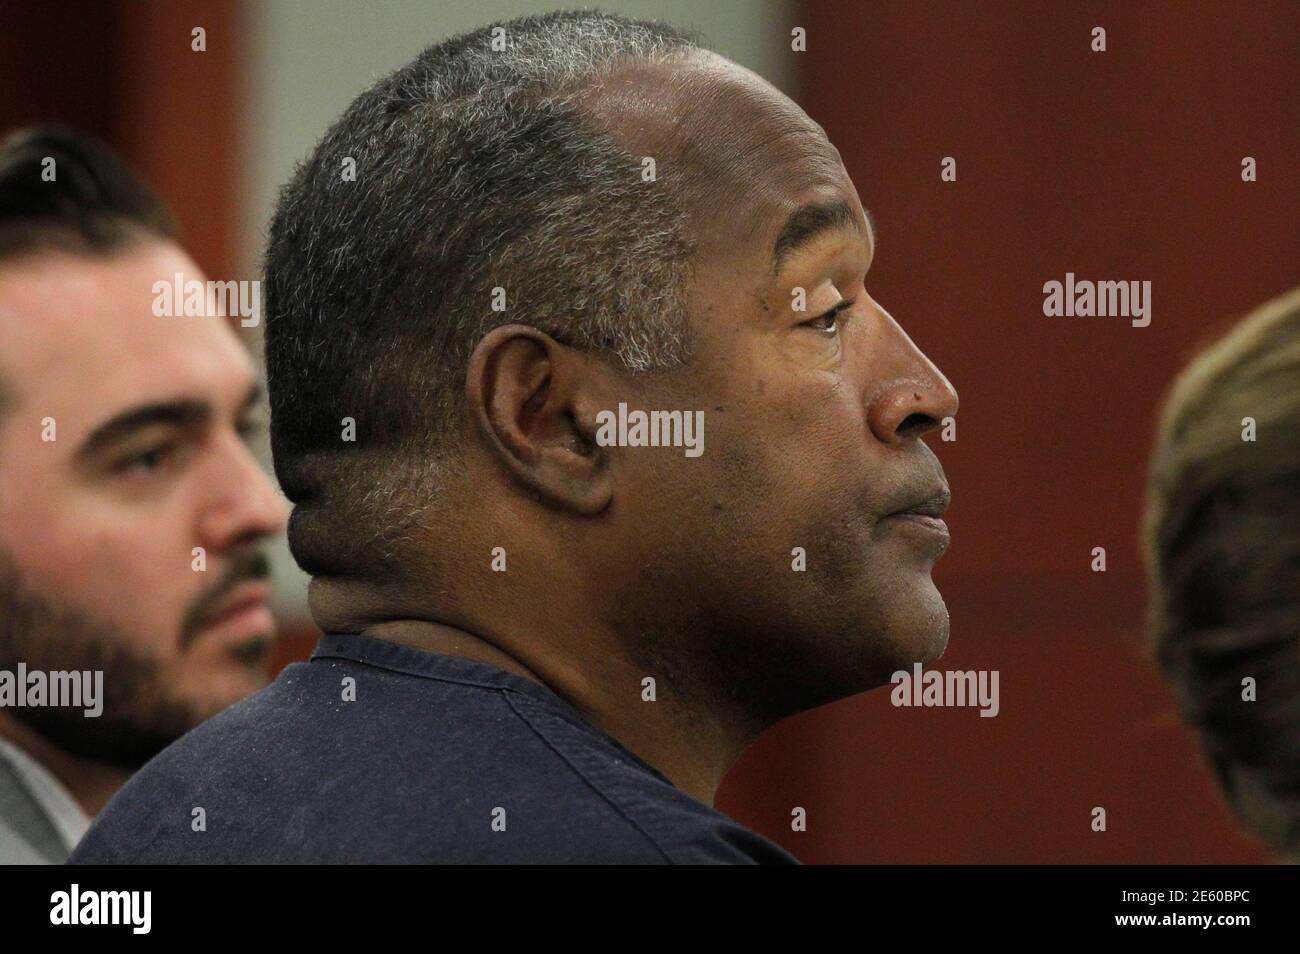 O.J. Simpson listens to testimony at an evidentiary hearing in Clark County District Court in Las Vegas, Nevada May 16, 2013. O.J. Simpson, the former football star famously acquitted of murder in 1995, took the witness stand in a Las Vegas courtroom on Wednesday seeking a new trial in an armed-robbery case that sent him to prison five years ago.    REUTERS/Steve Marcus    (UNITED STATES  - Tags: CRIME LAW ENTERTAINMENT SPORT) Stock Photo